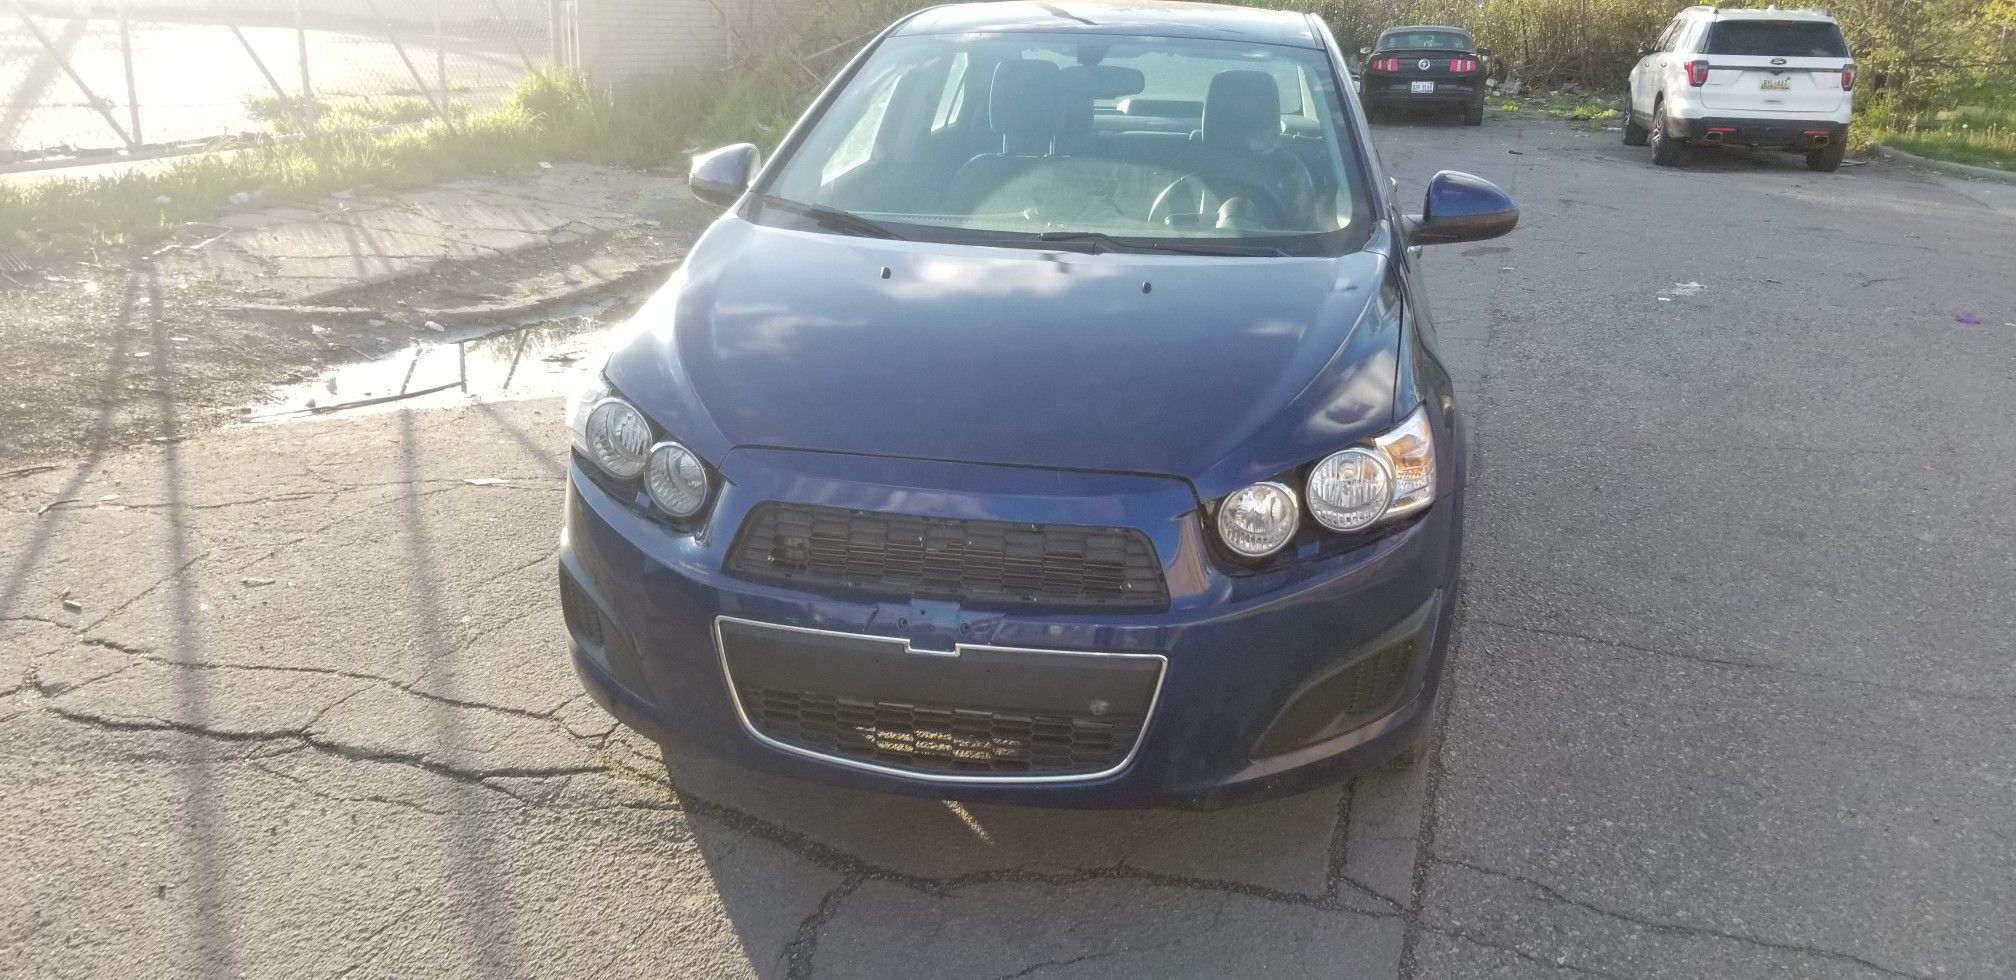 2014 Chevy sonic low mileage